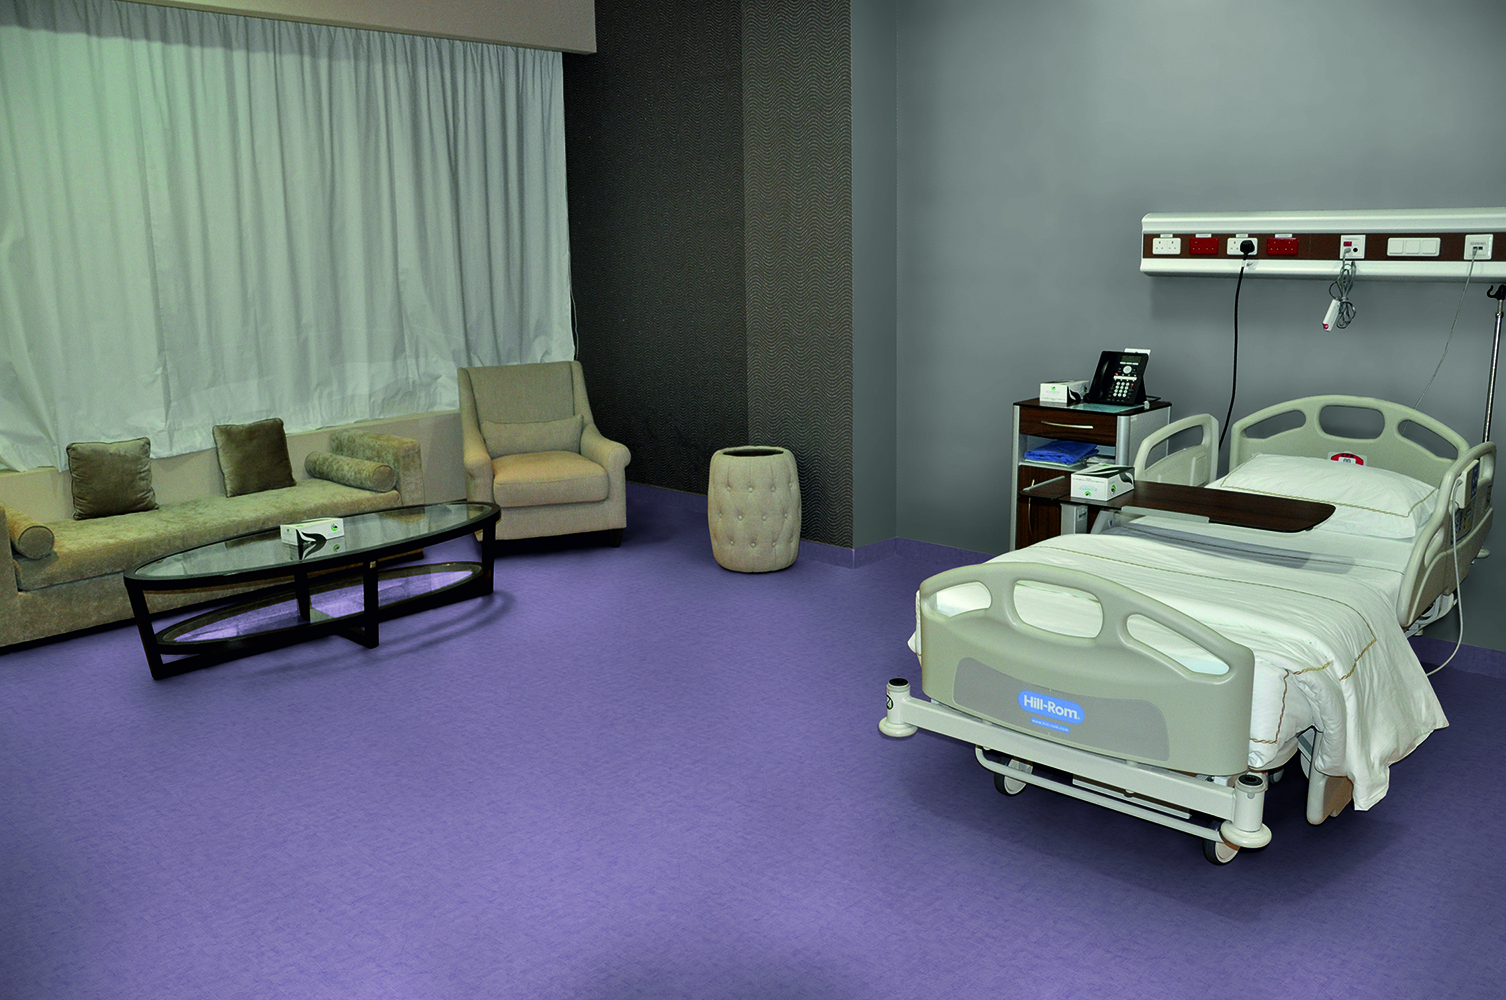 The importance of flooring specification in healthcare environments